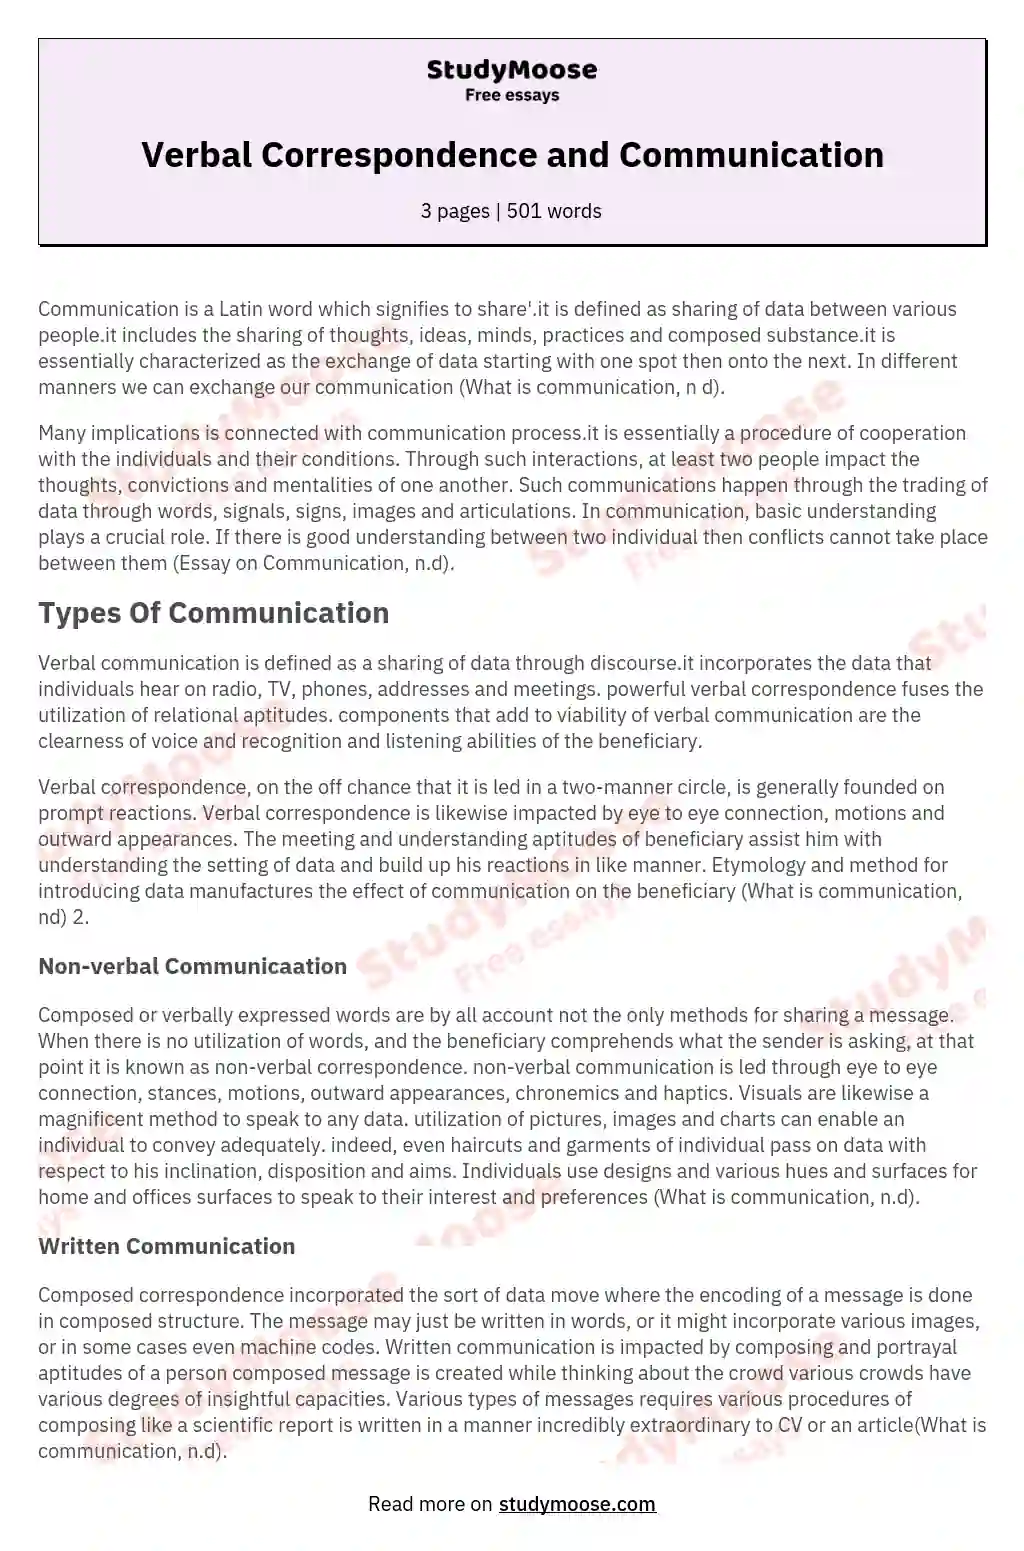 Verbal Correspondence and Communication essay